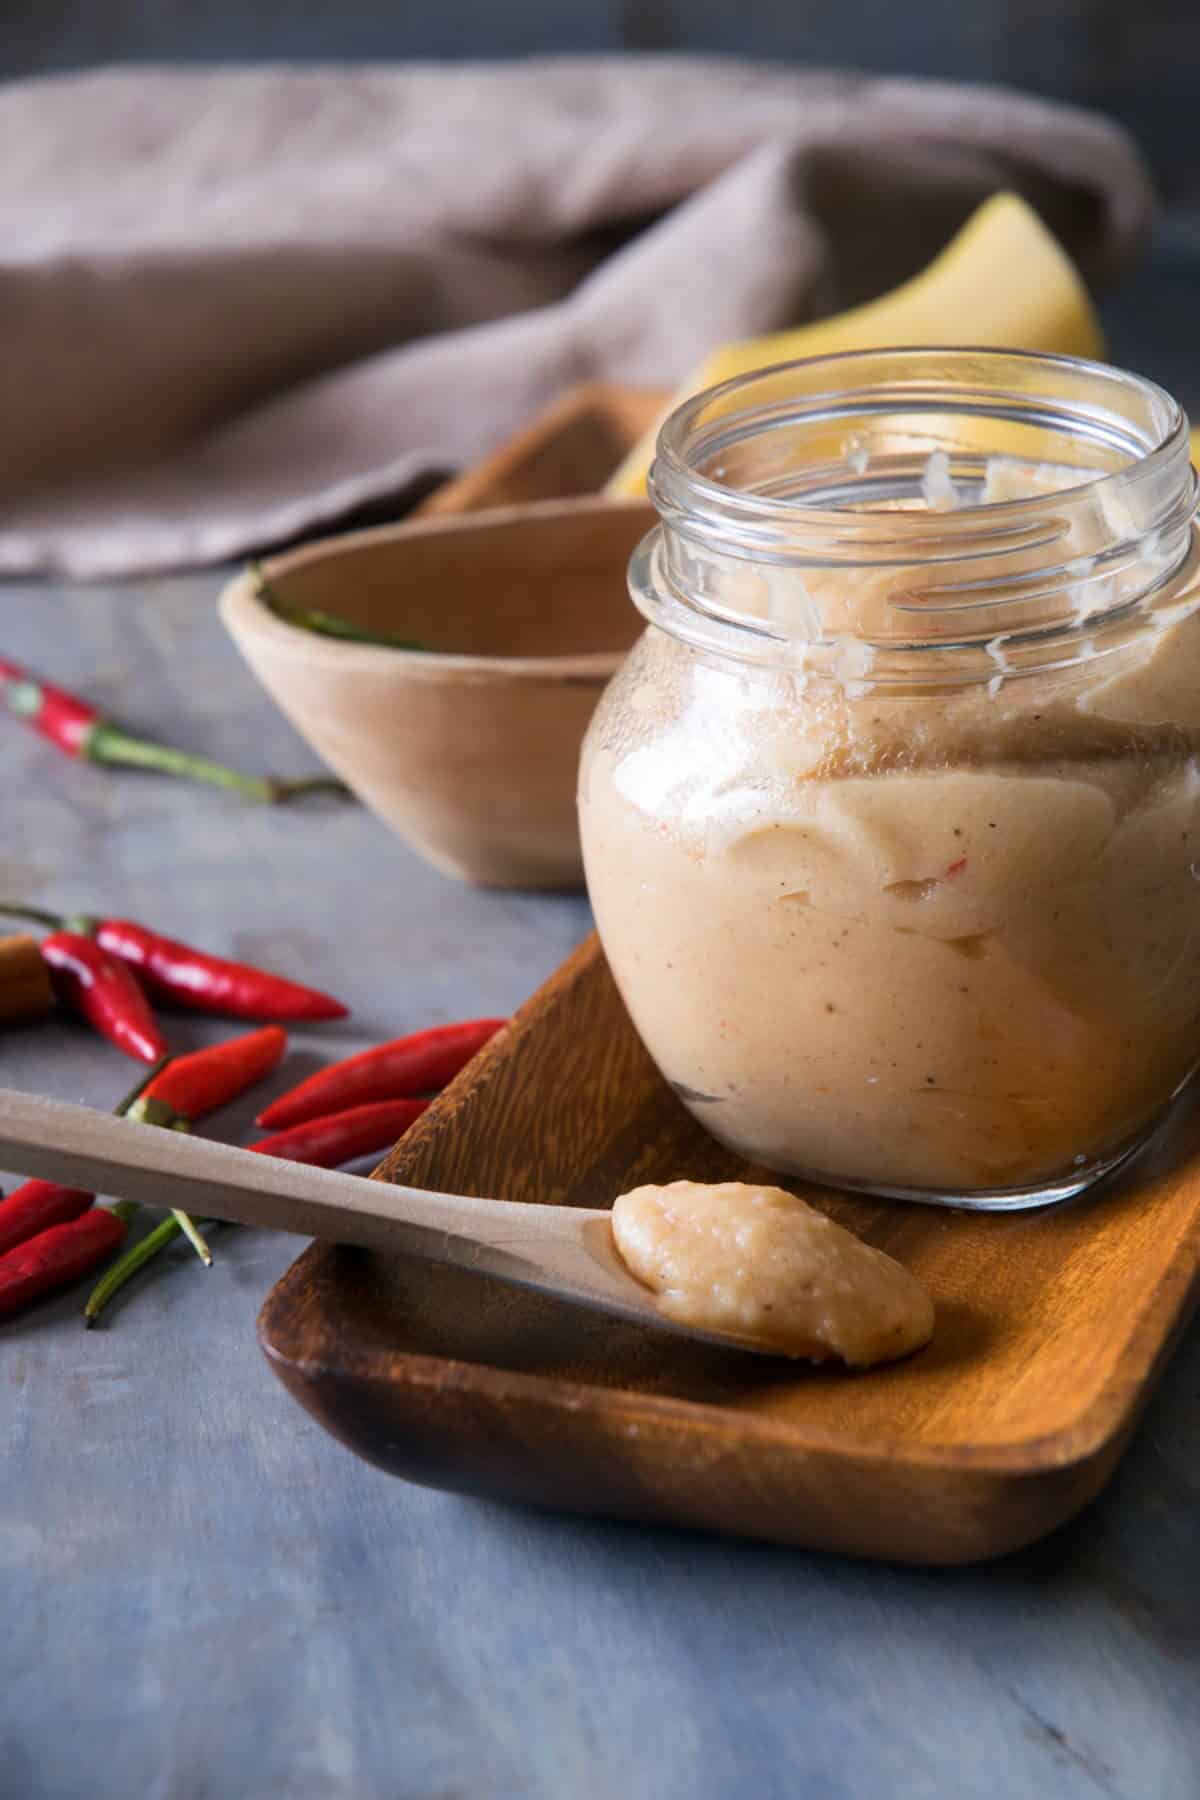 Banana ketchup in a small jar and on a small spoon, chili peppers on the side.